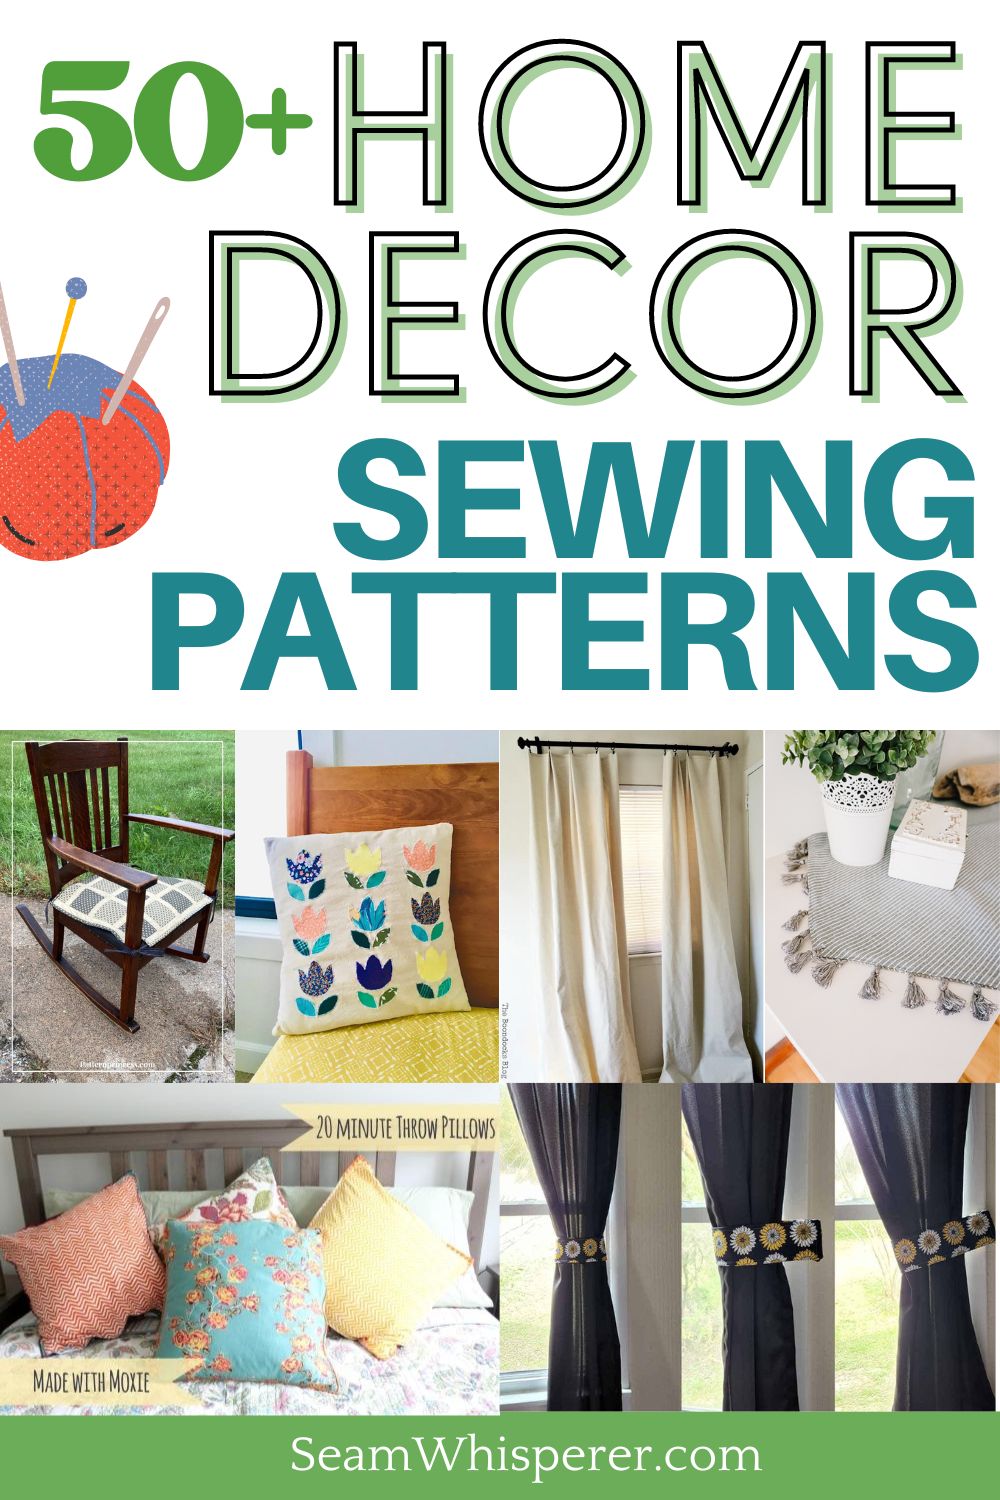 Free Baby Sewing patterns To Sew in 2023 - AppleGreen Cottage